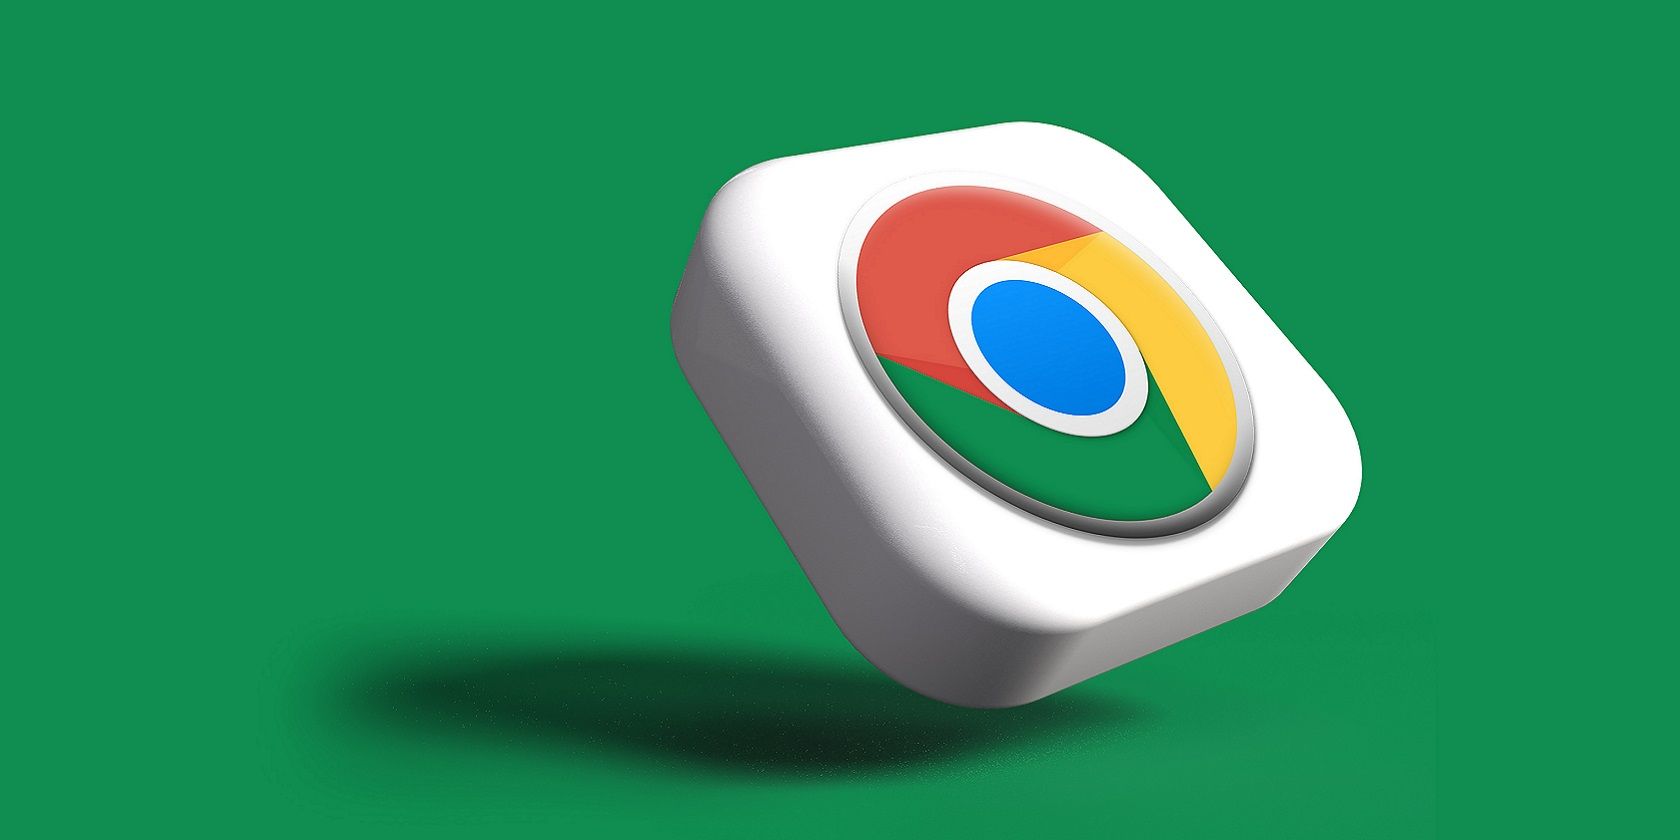 The Google Chrome logo against a green background